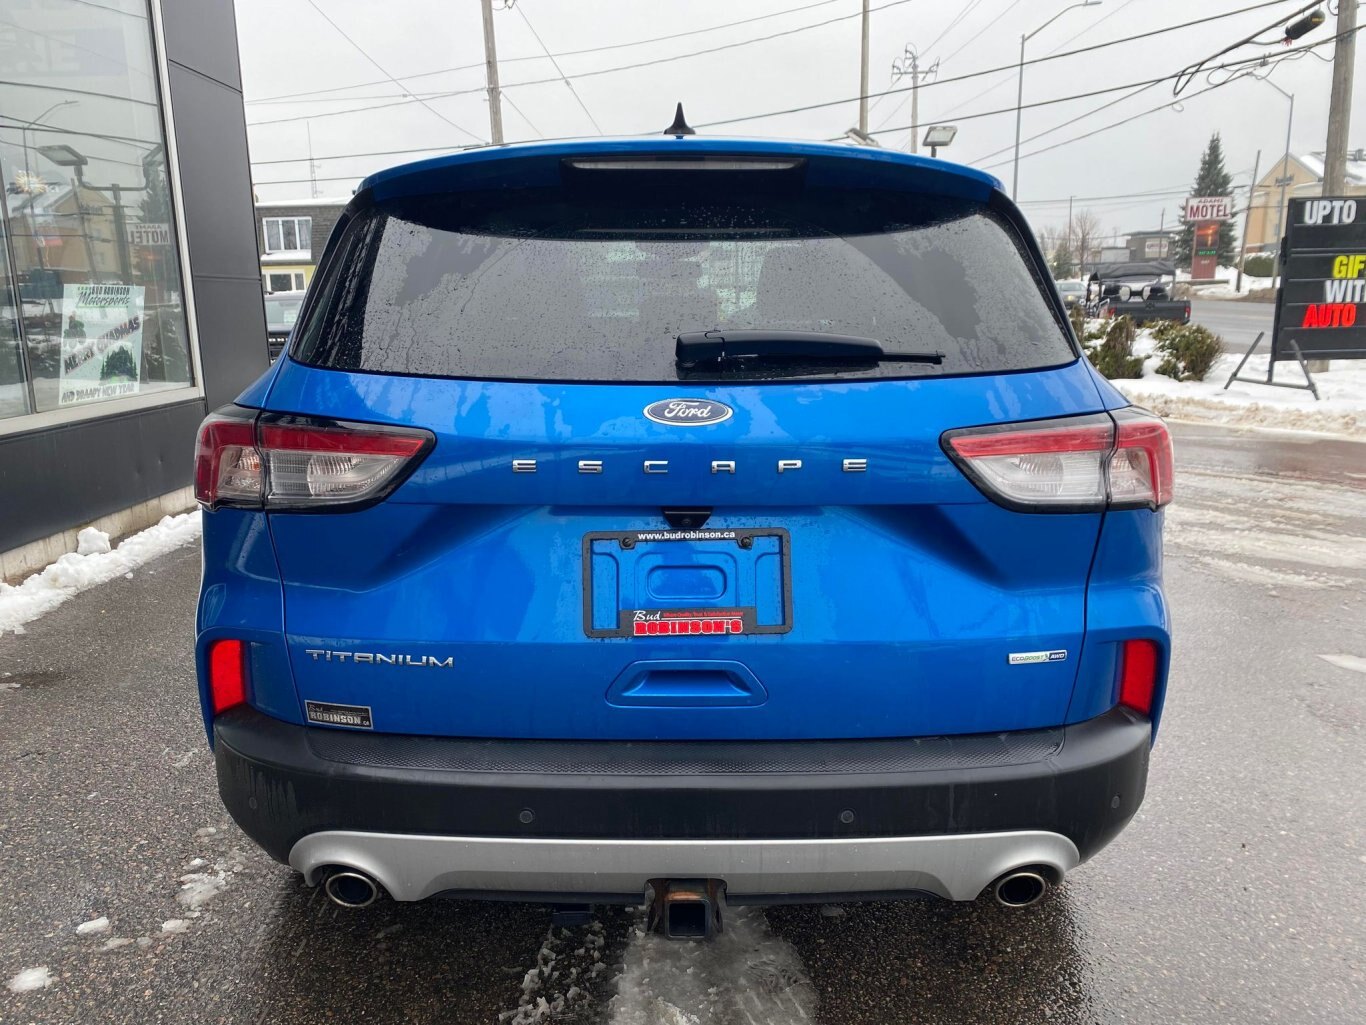 2020 FORD ESCAPE TITANIUM ECOBOOST AWD WITH SUNROOF, LEATHER SEATS, HEATED SEATS, HEATED STEERING WHEEL, REAR VIEW CAMERA AND NAVIGATION!!